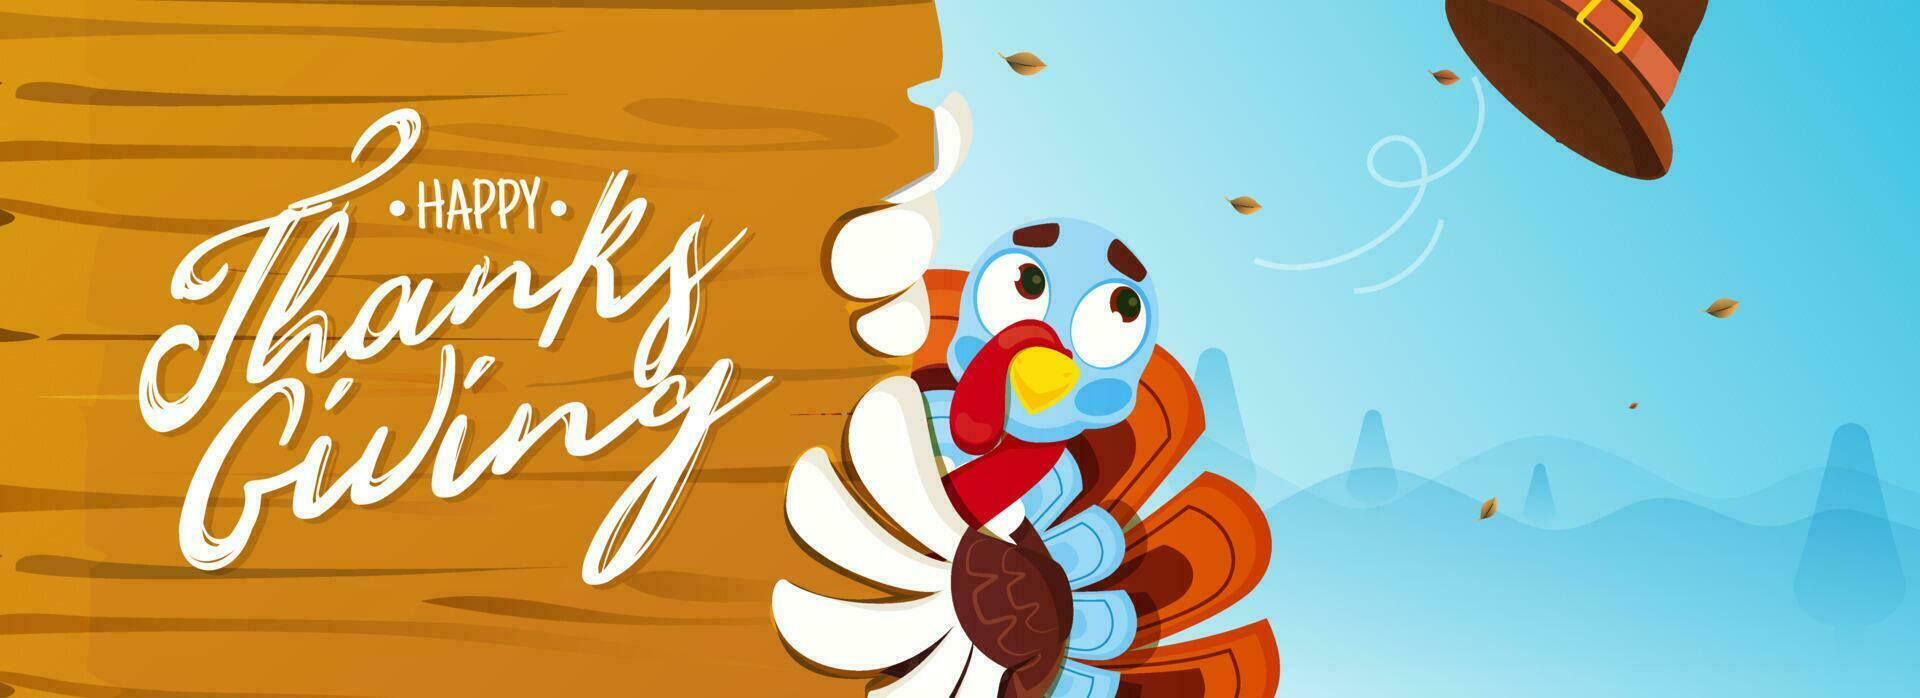 Calligraphy of Happy Thanksgiving on wooden board with turkey bird and pilgrim hat on blue landscape background. Header or banner design. vector